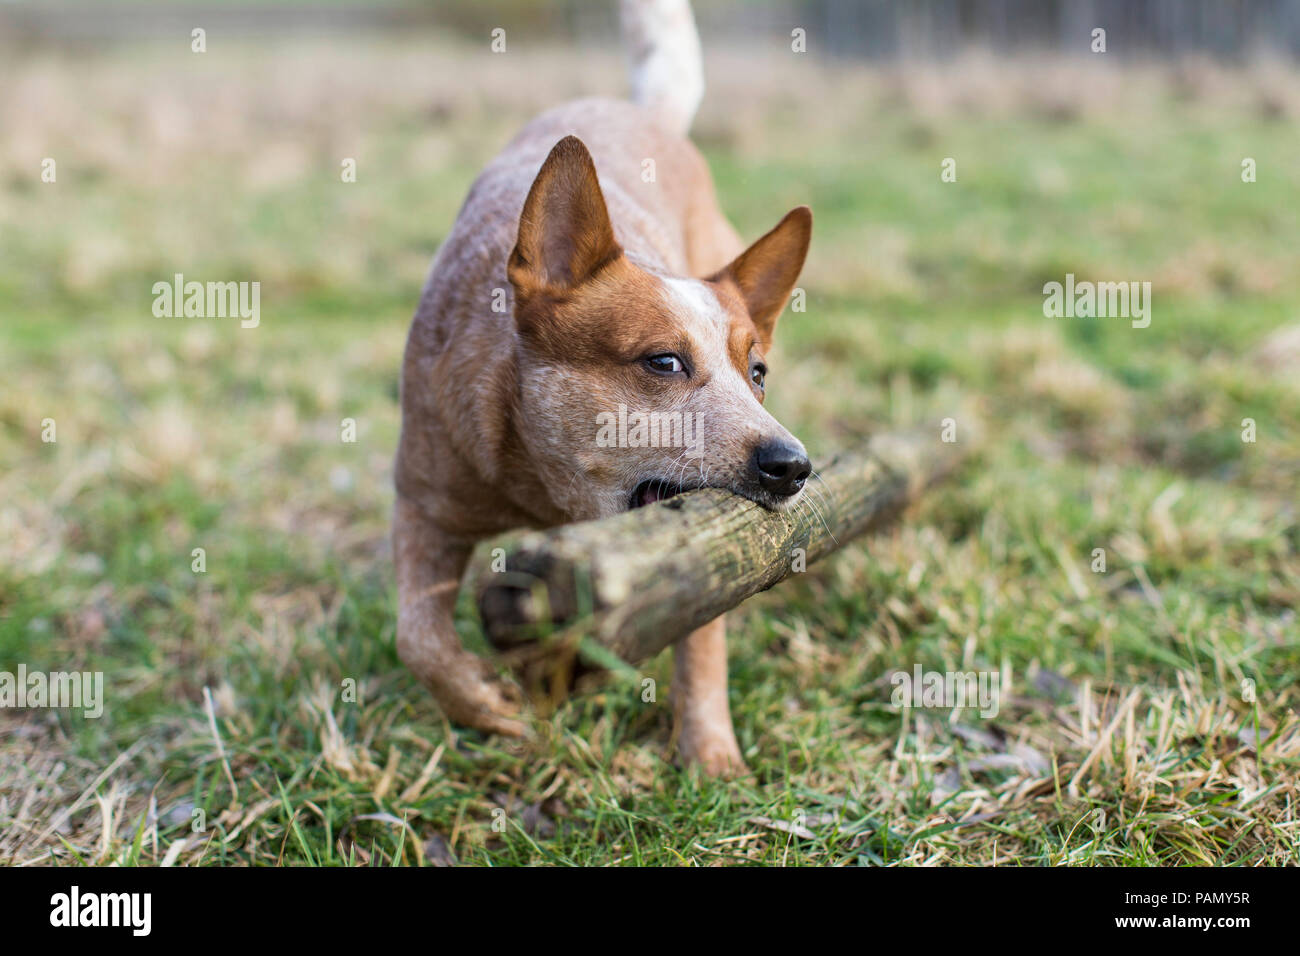 Australian Cattle Dog carries a wooden post. Germany.. Stock Photo